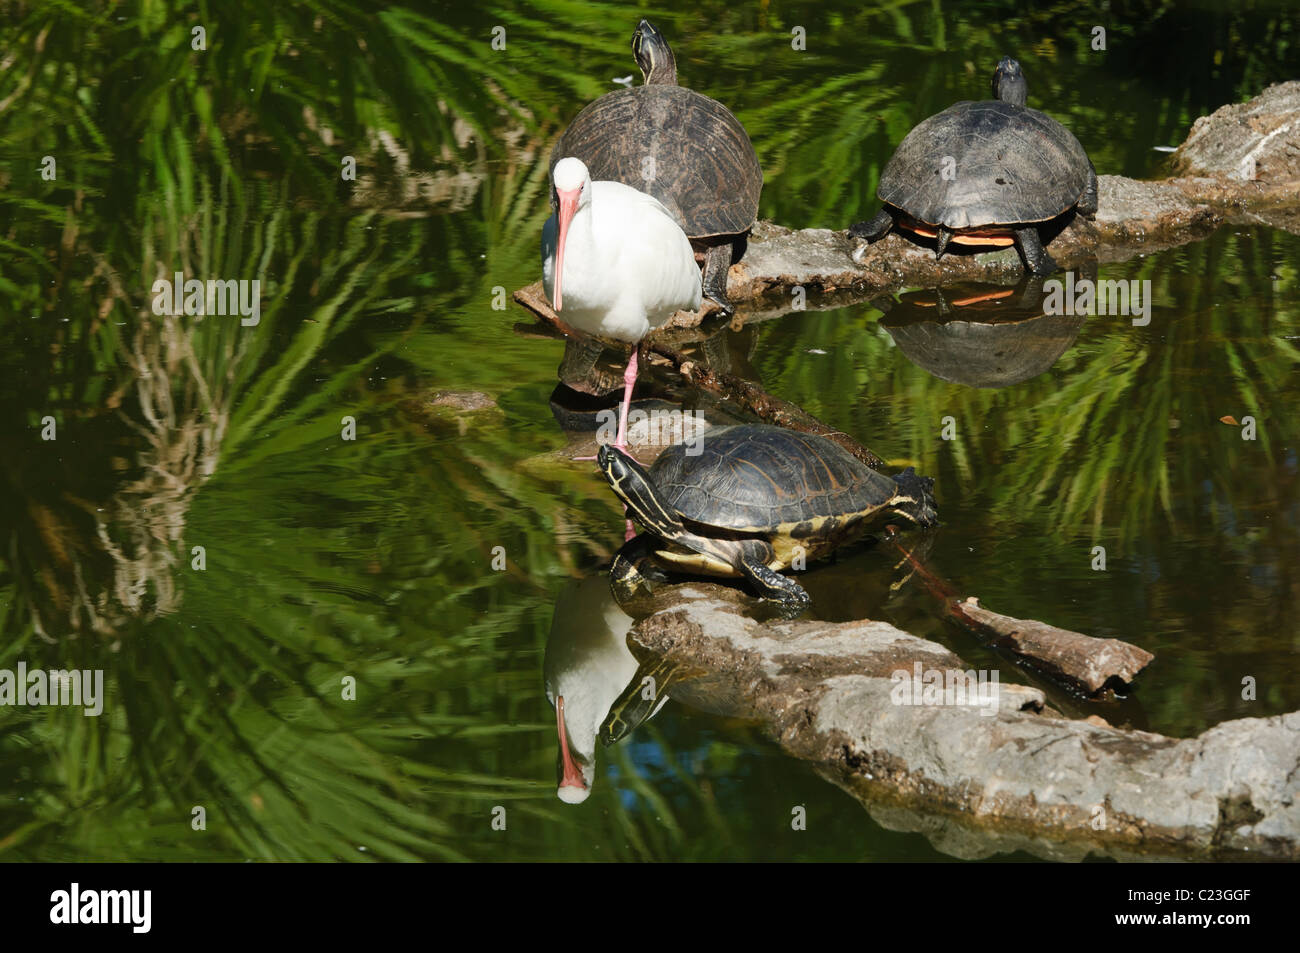 Closeup of a Florida Redbelly Turtle (Pseudemys nelsoni) Stock Photo